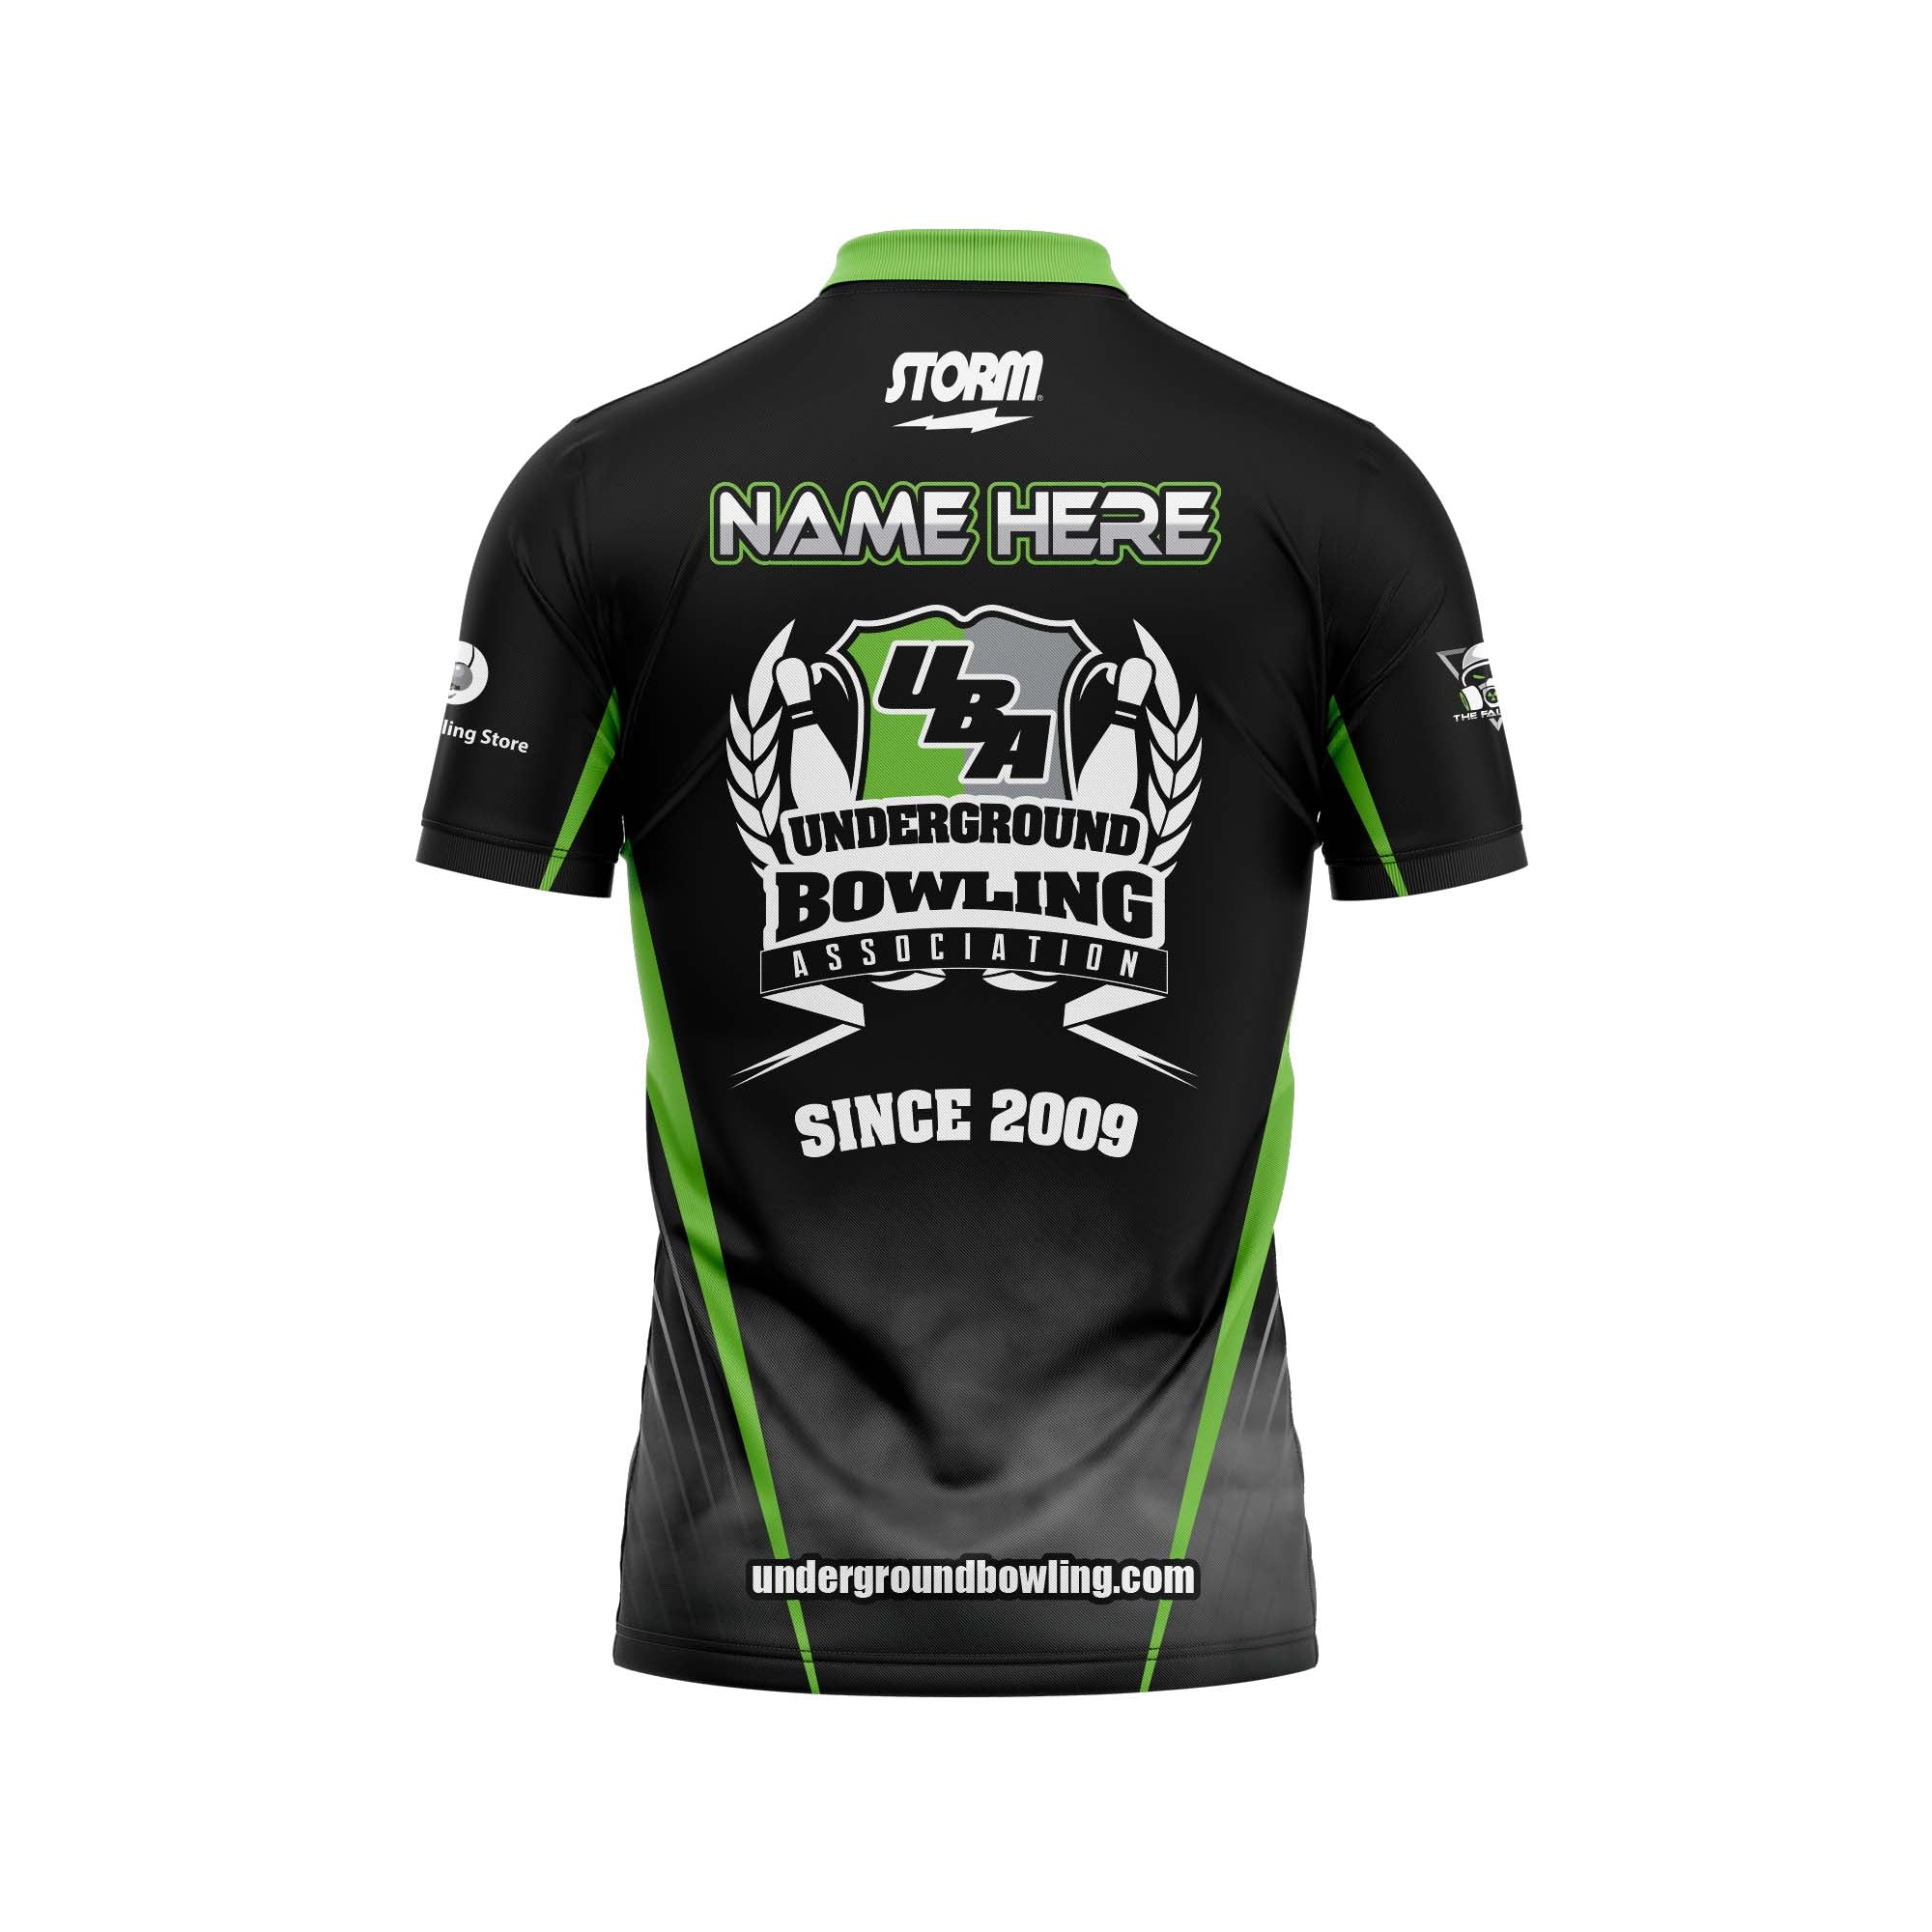 The Fallout Home / Main Jersey